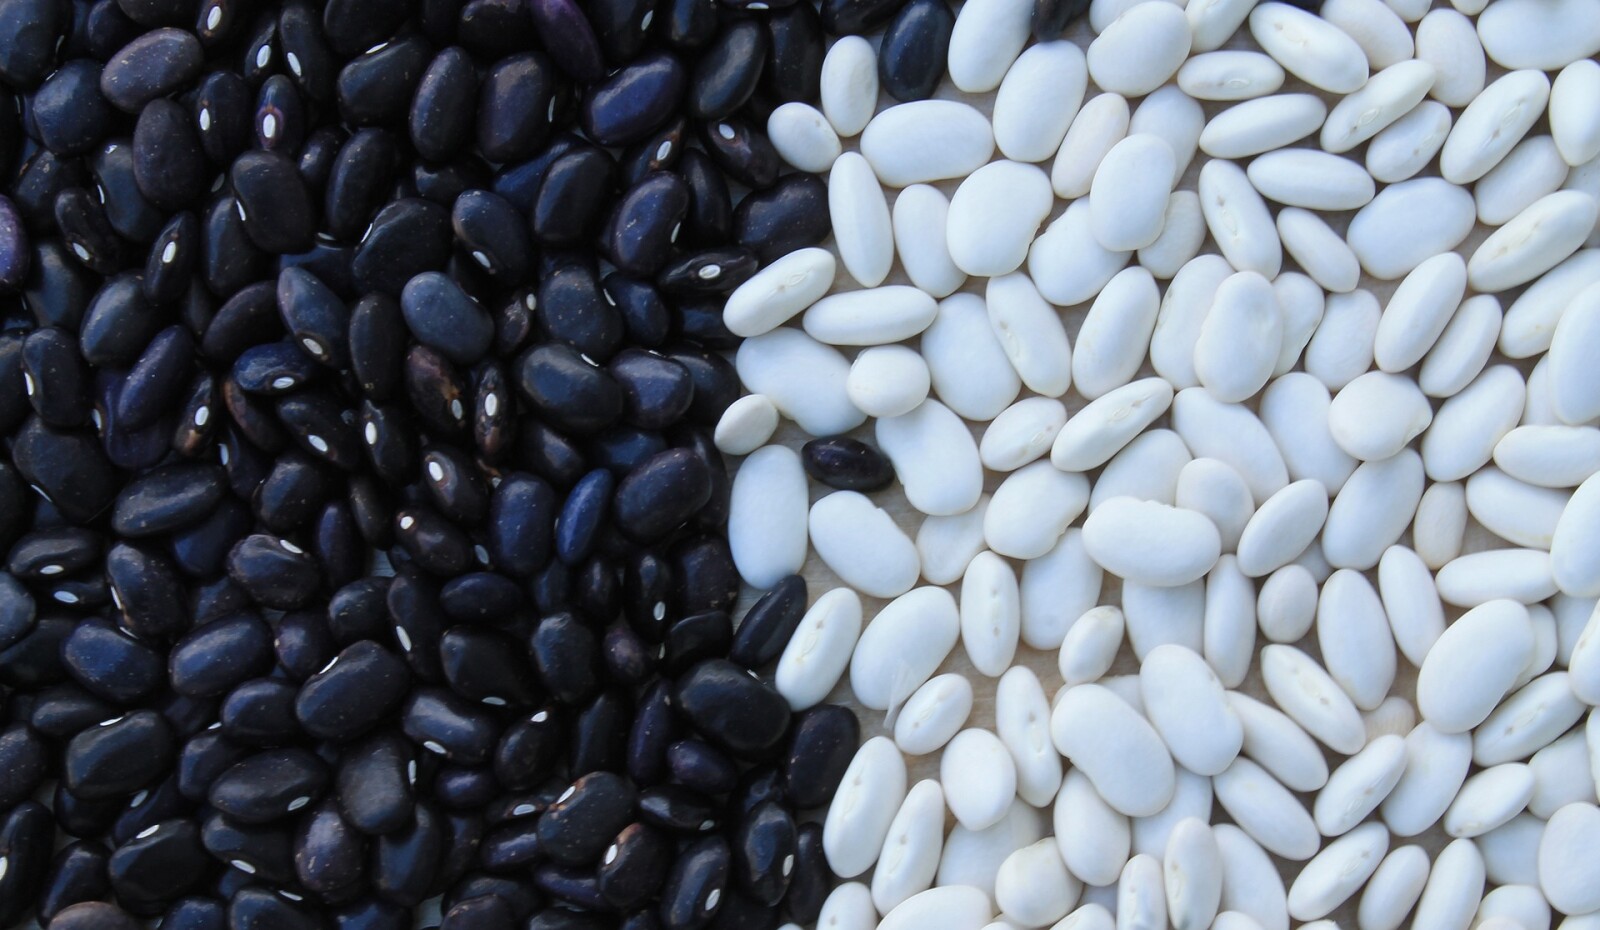 Unlocking the Power of Beans: How to Prepare Them Safely to Remove Lectins